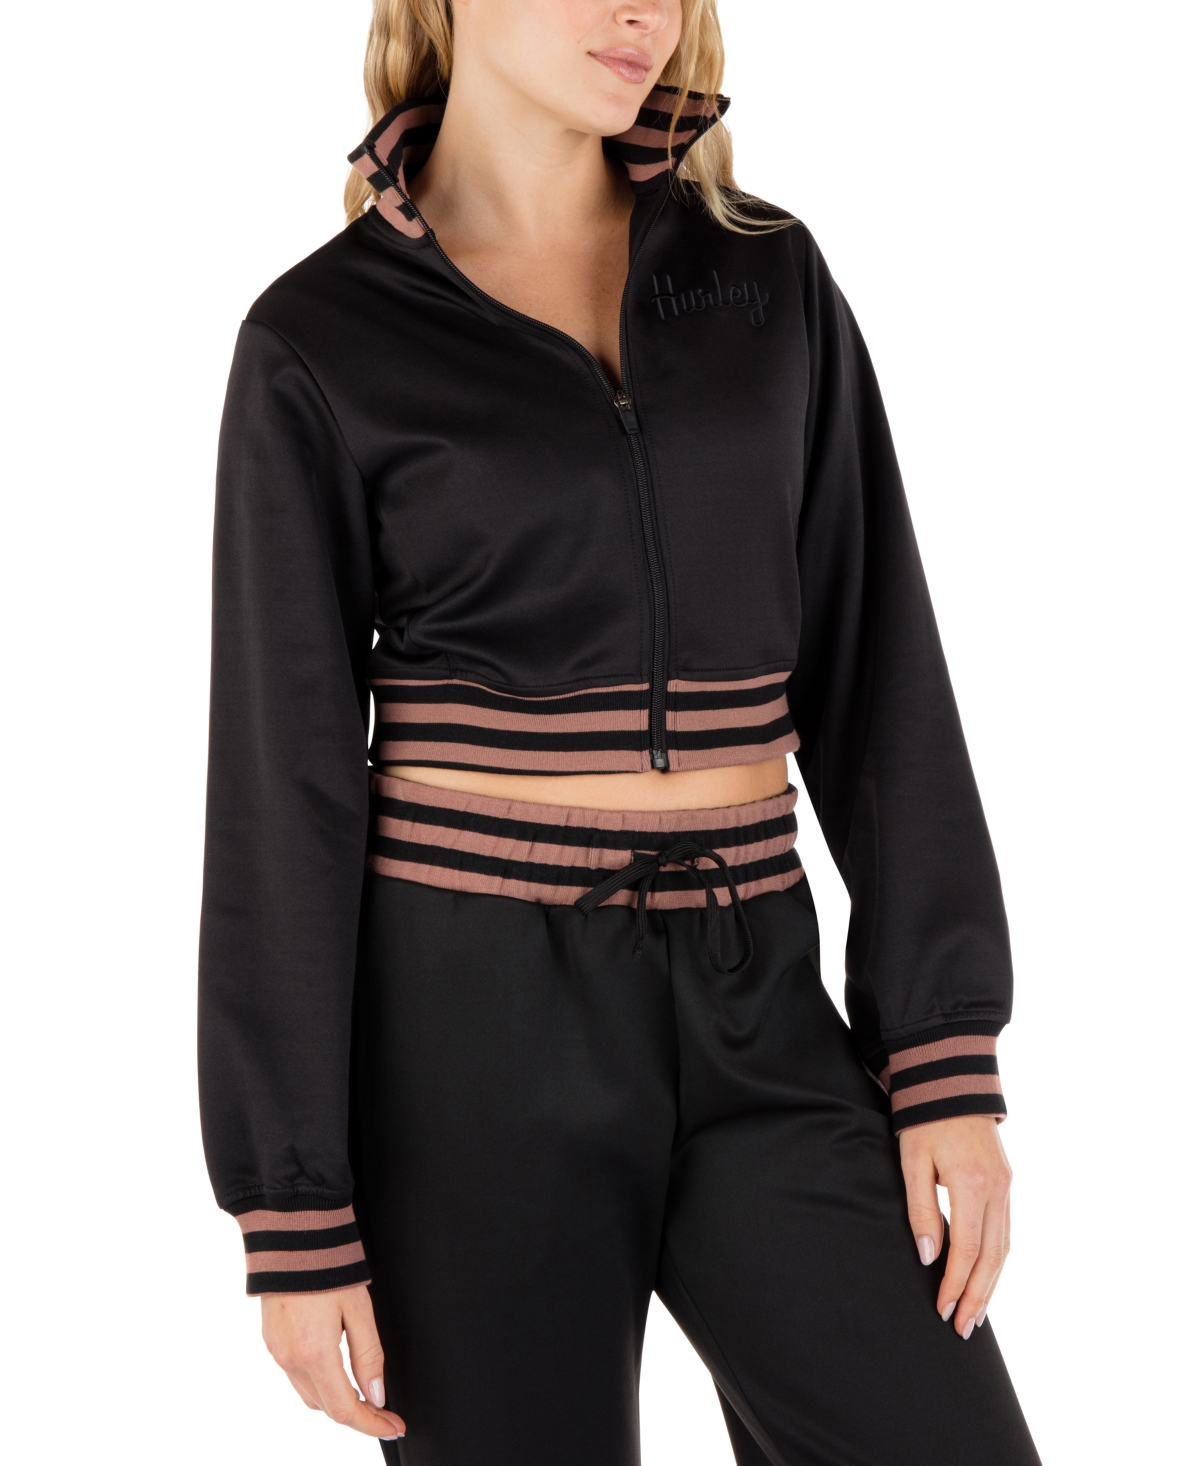 Hurley Juniors' Cropped Track Jacket In Black